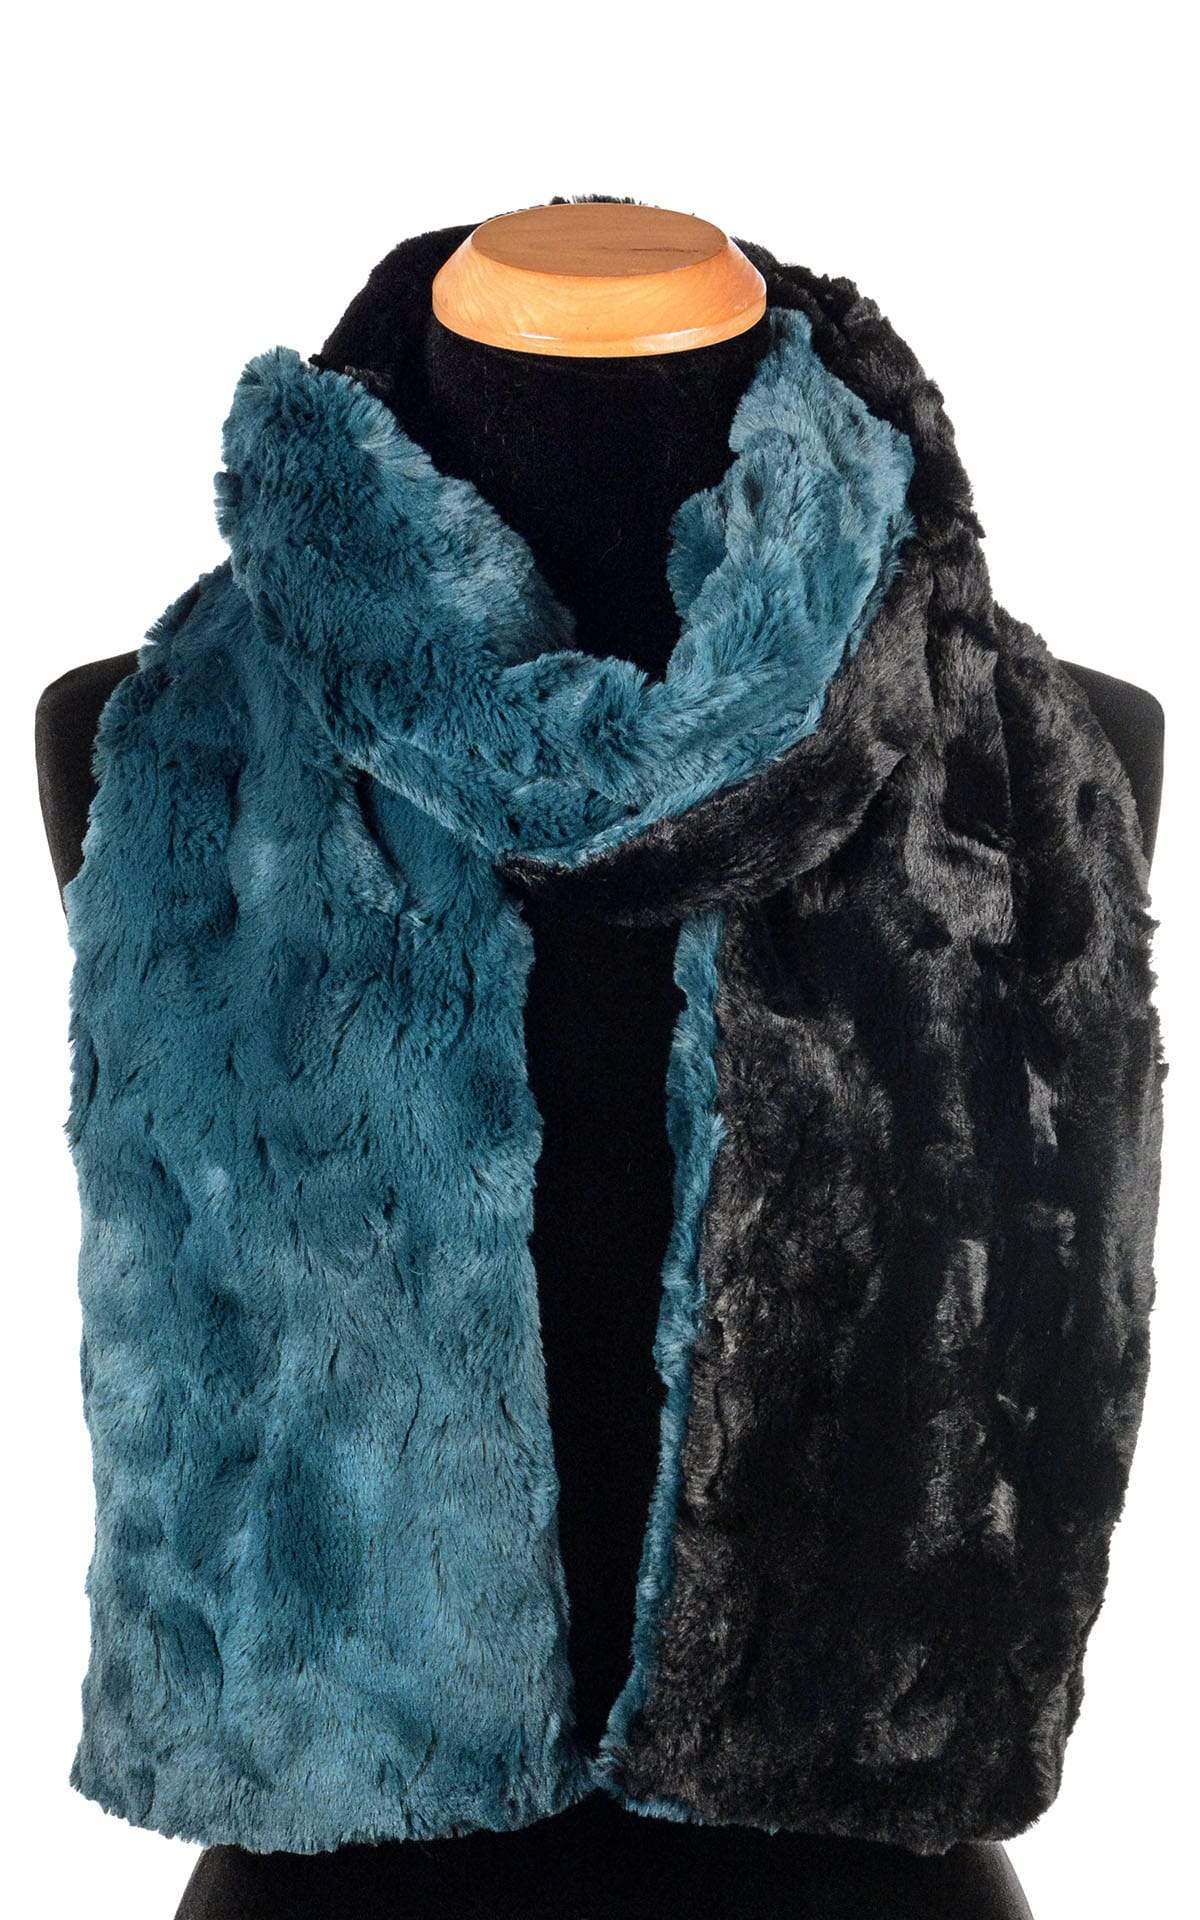 Classic Scarf - Two-Tone, Luxury Faux Fur in Peacock Pond